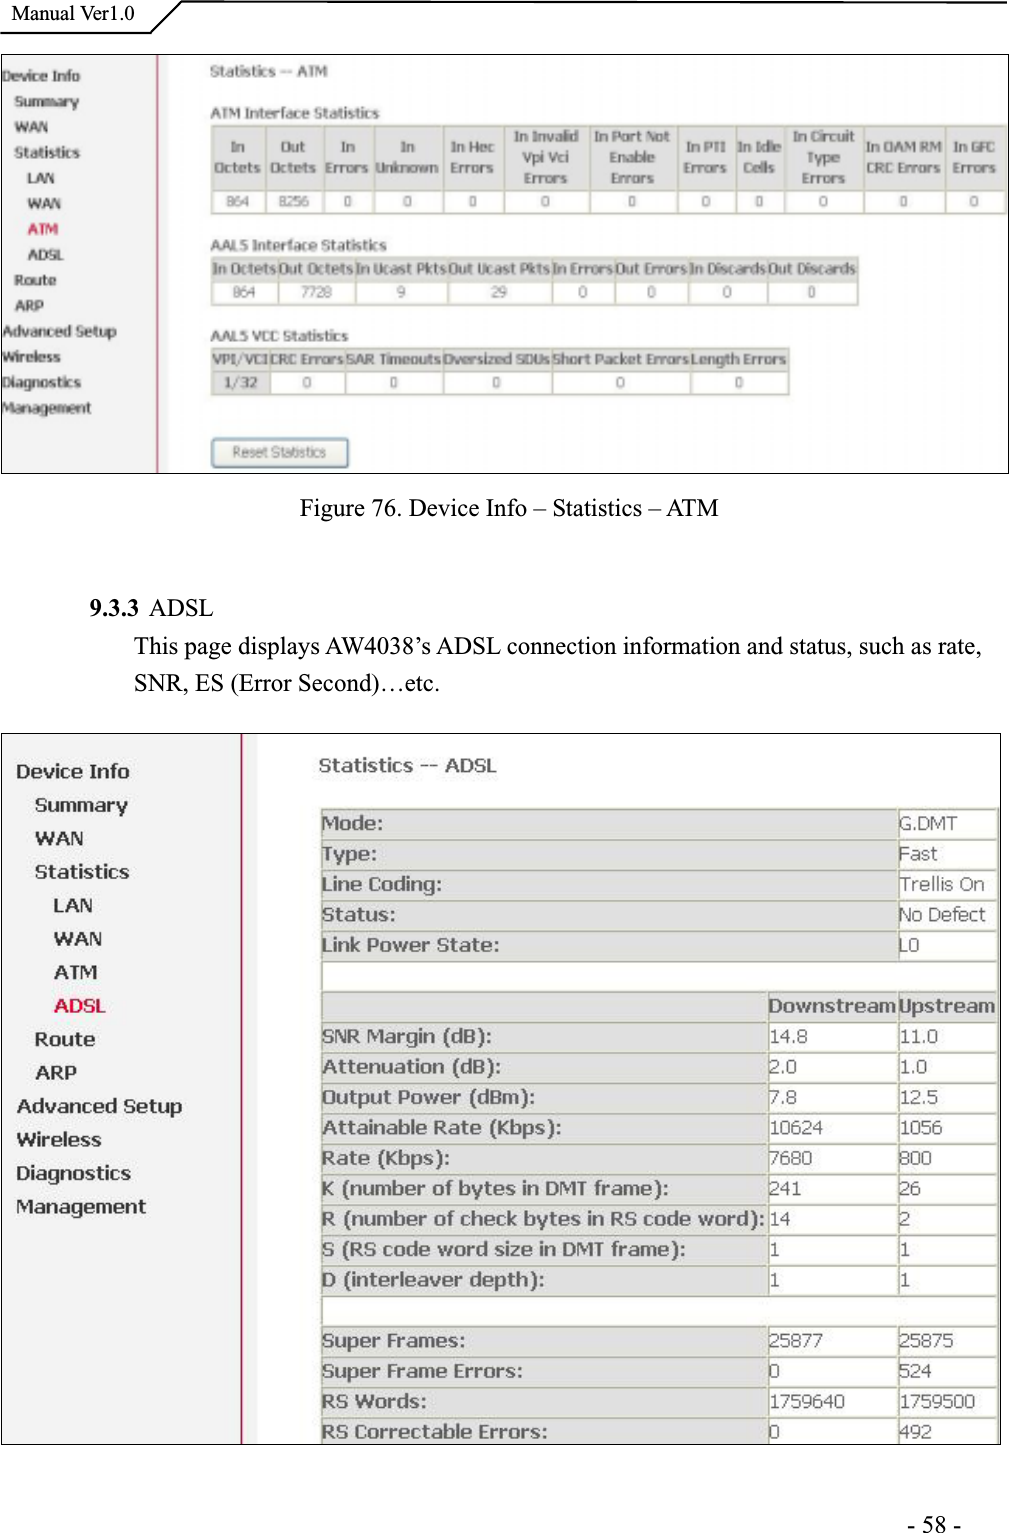  Manual Ver1.0Figure 76. Device Info – Statistics – ATM9.3.3 ADSLThis page displays AW4038’s ADSL connection information and status, such as rate, SNR, ES (Error Second)…etc.                                                                     -58-